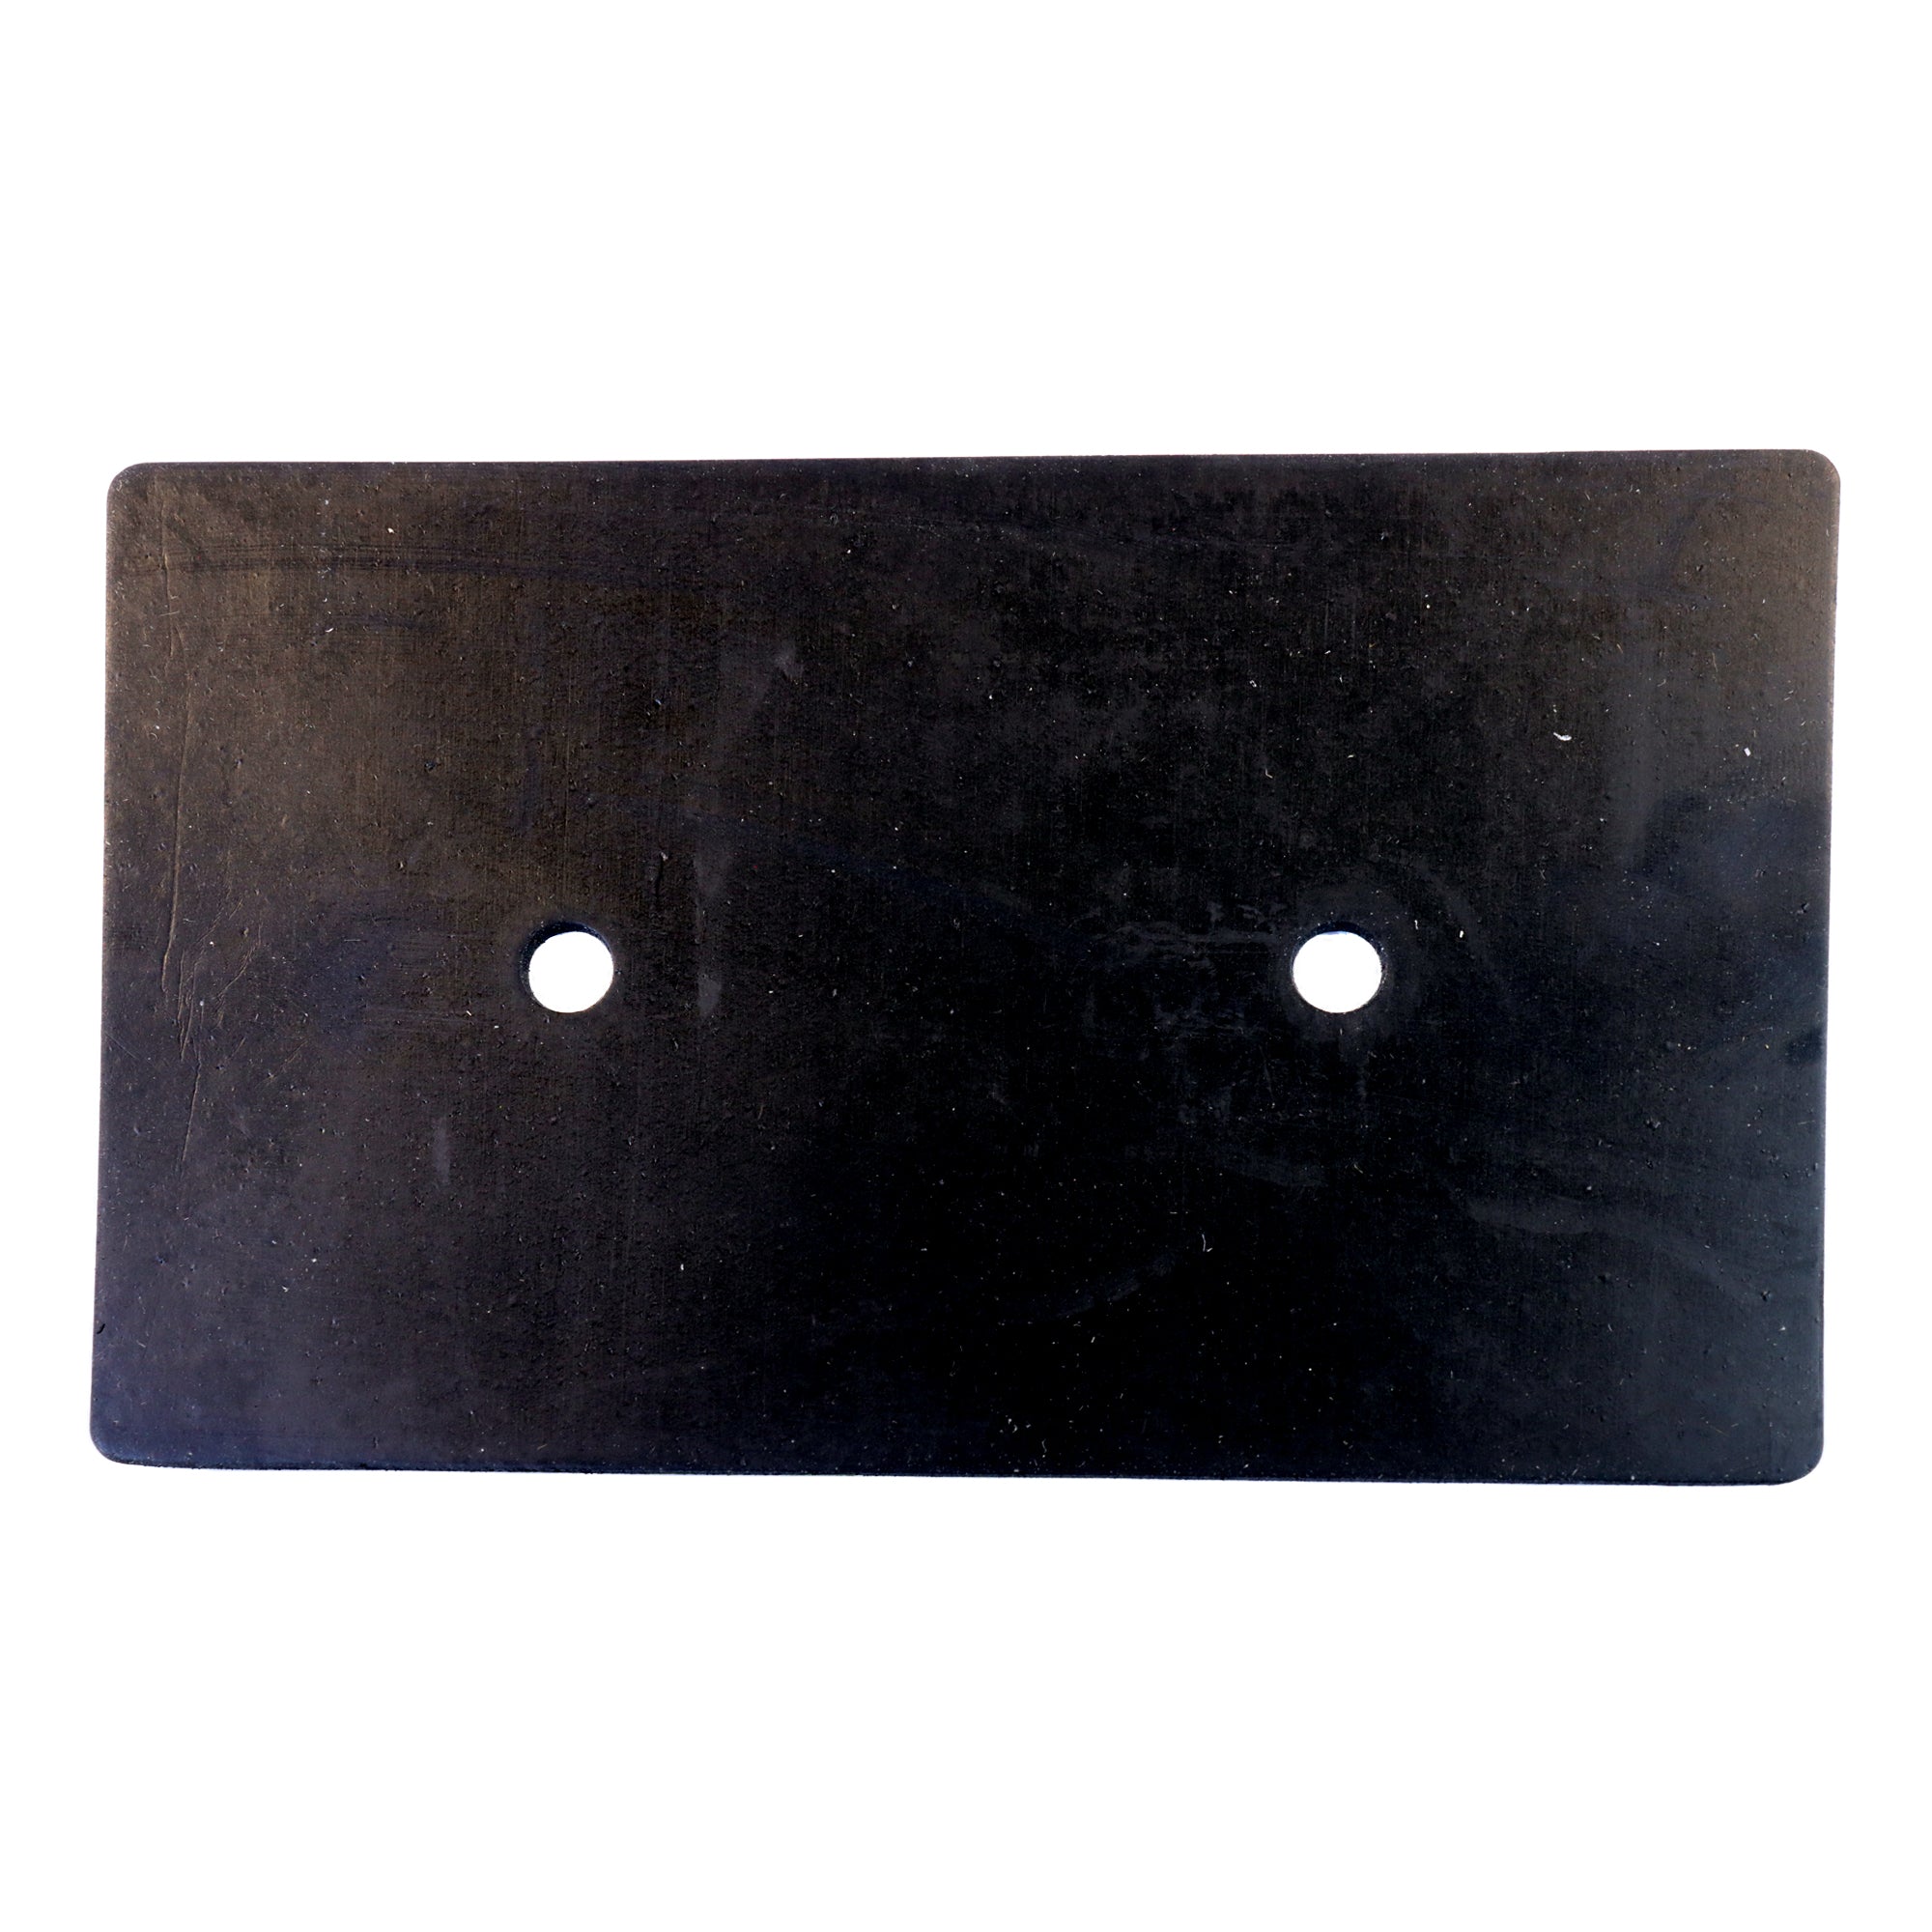 0705 - Replacement Gasket for the 1105 adapter